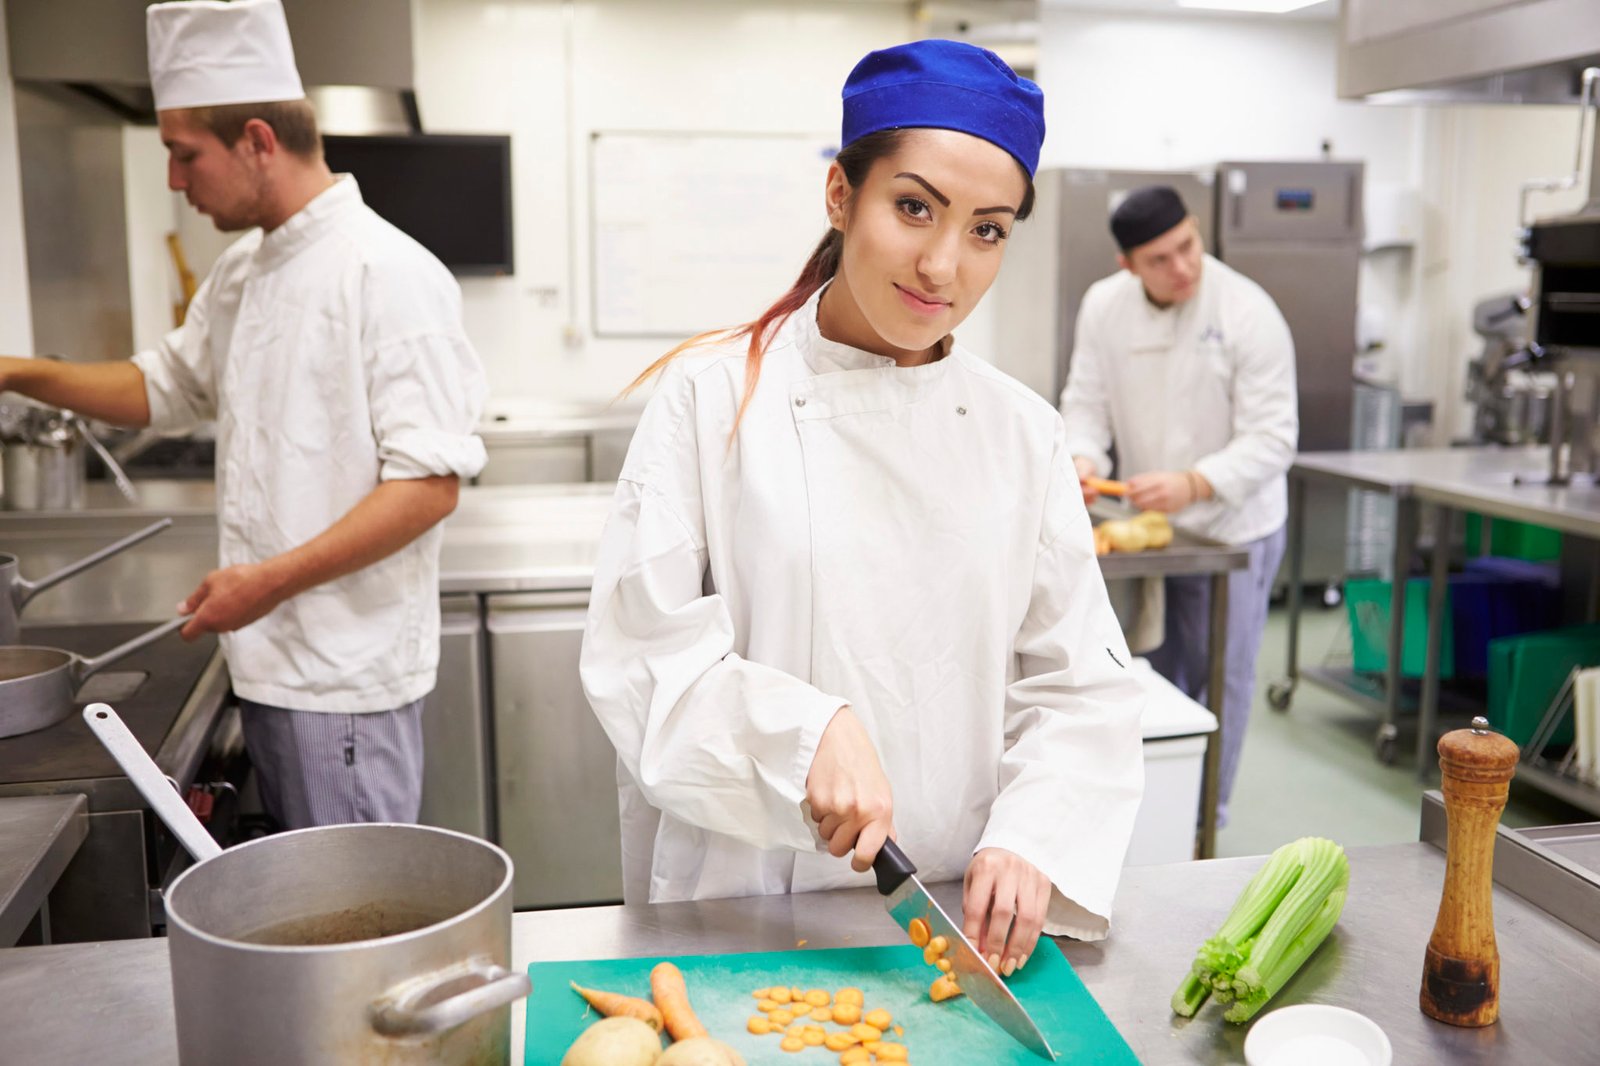 Chef jobs in australia for foreigners